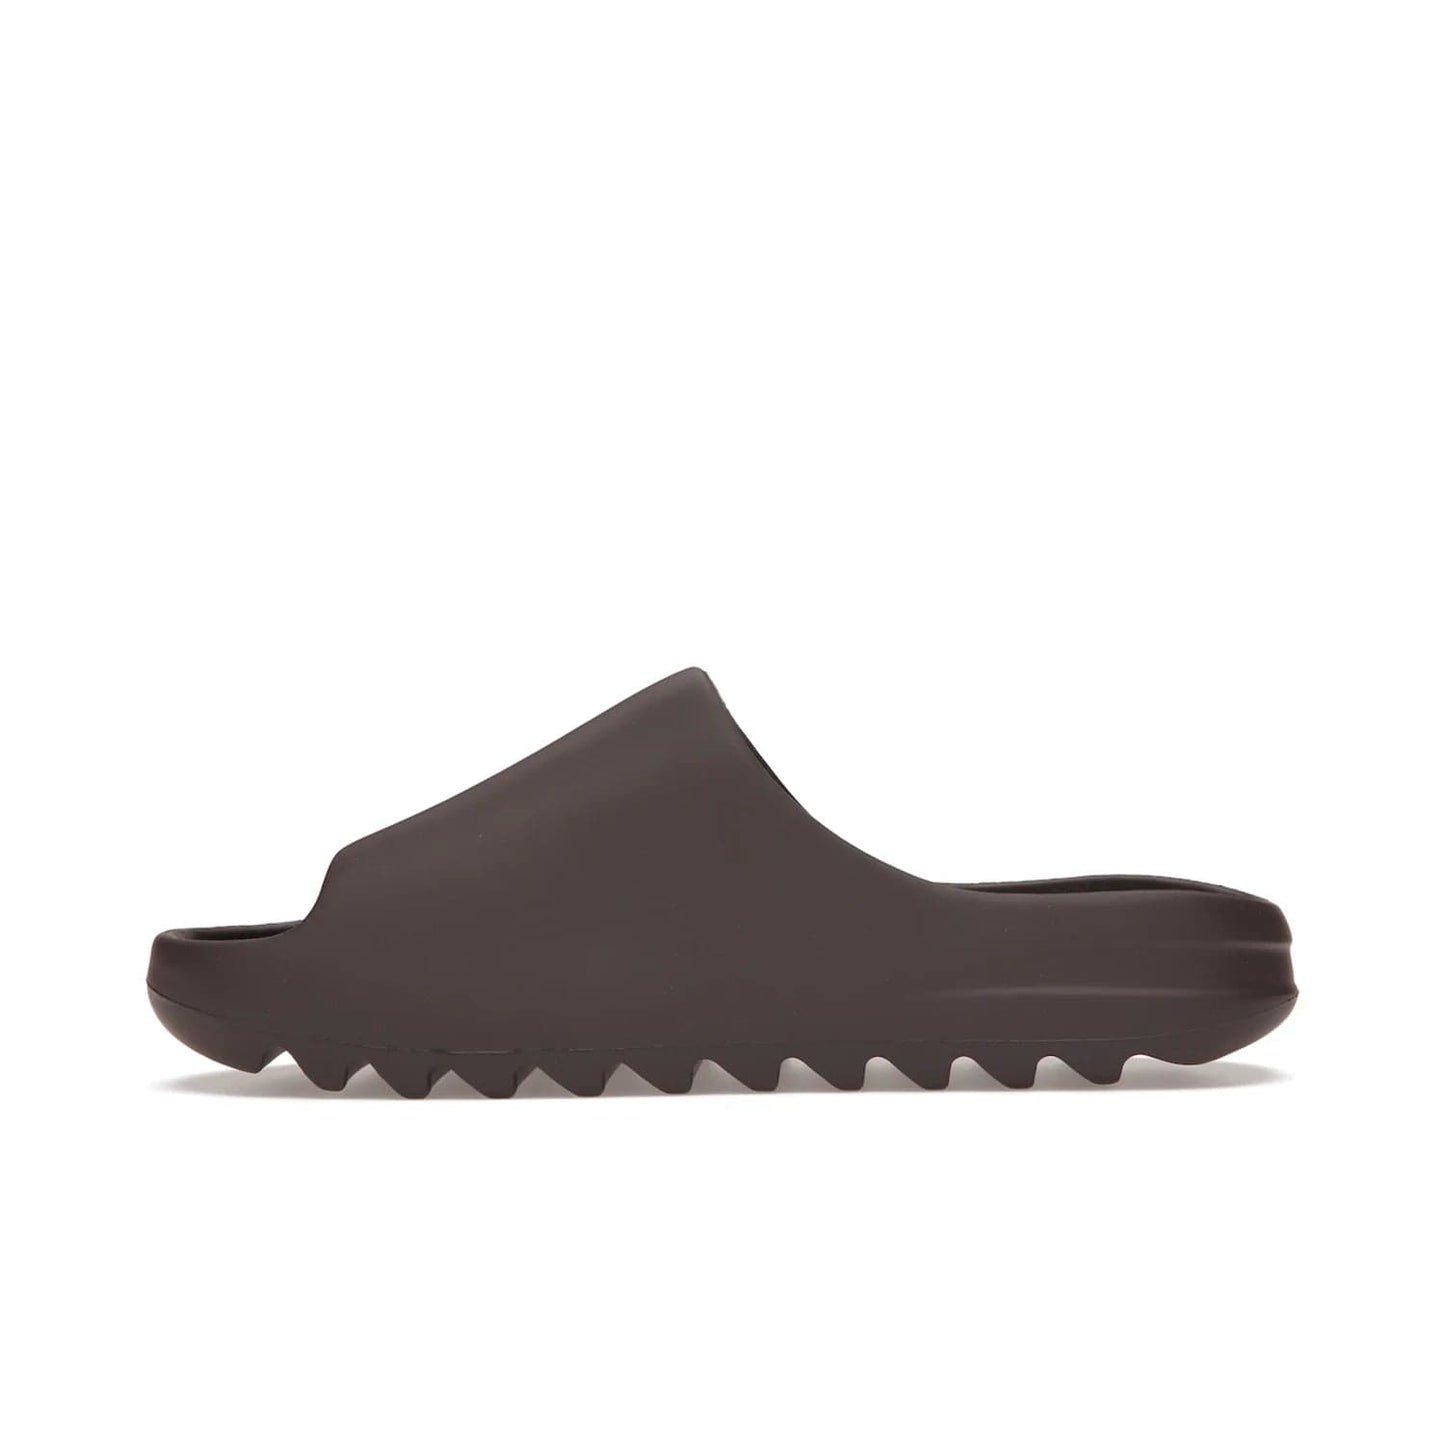 adidas Yeezy Slide Soot - Image 19 - Only at www.BallersClubKickz.com - Shop the Yeezy Slide Soot sneaker by Adidas, a sleek blend of form and function. Monochrome silhouette in Soot/Soot/Soot. Lightweight EVA foam offers comfort and durability. Get the must-have style today.